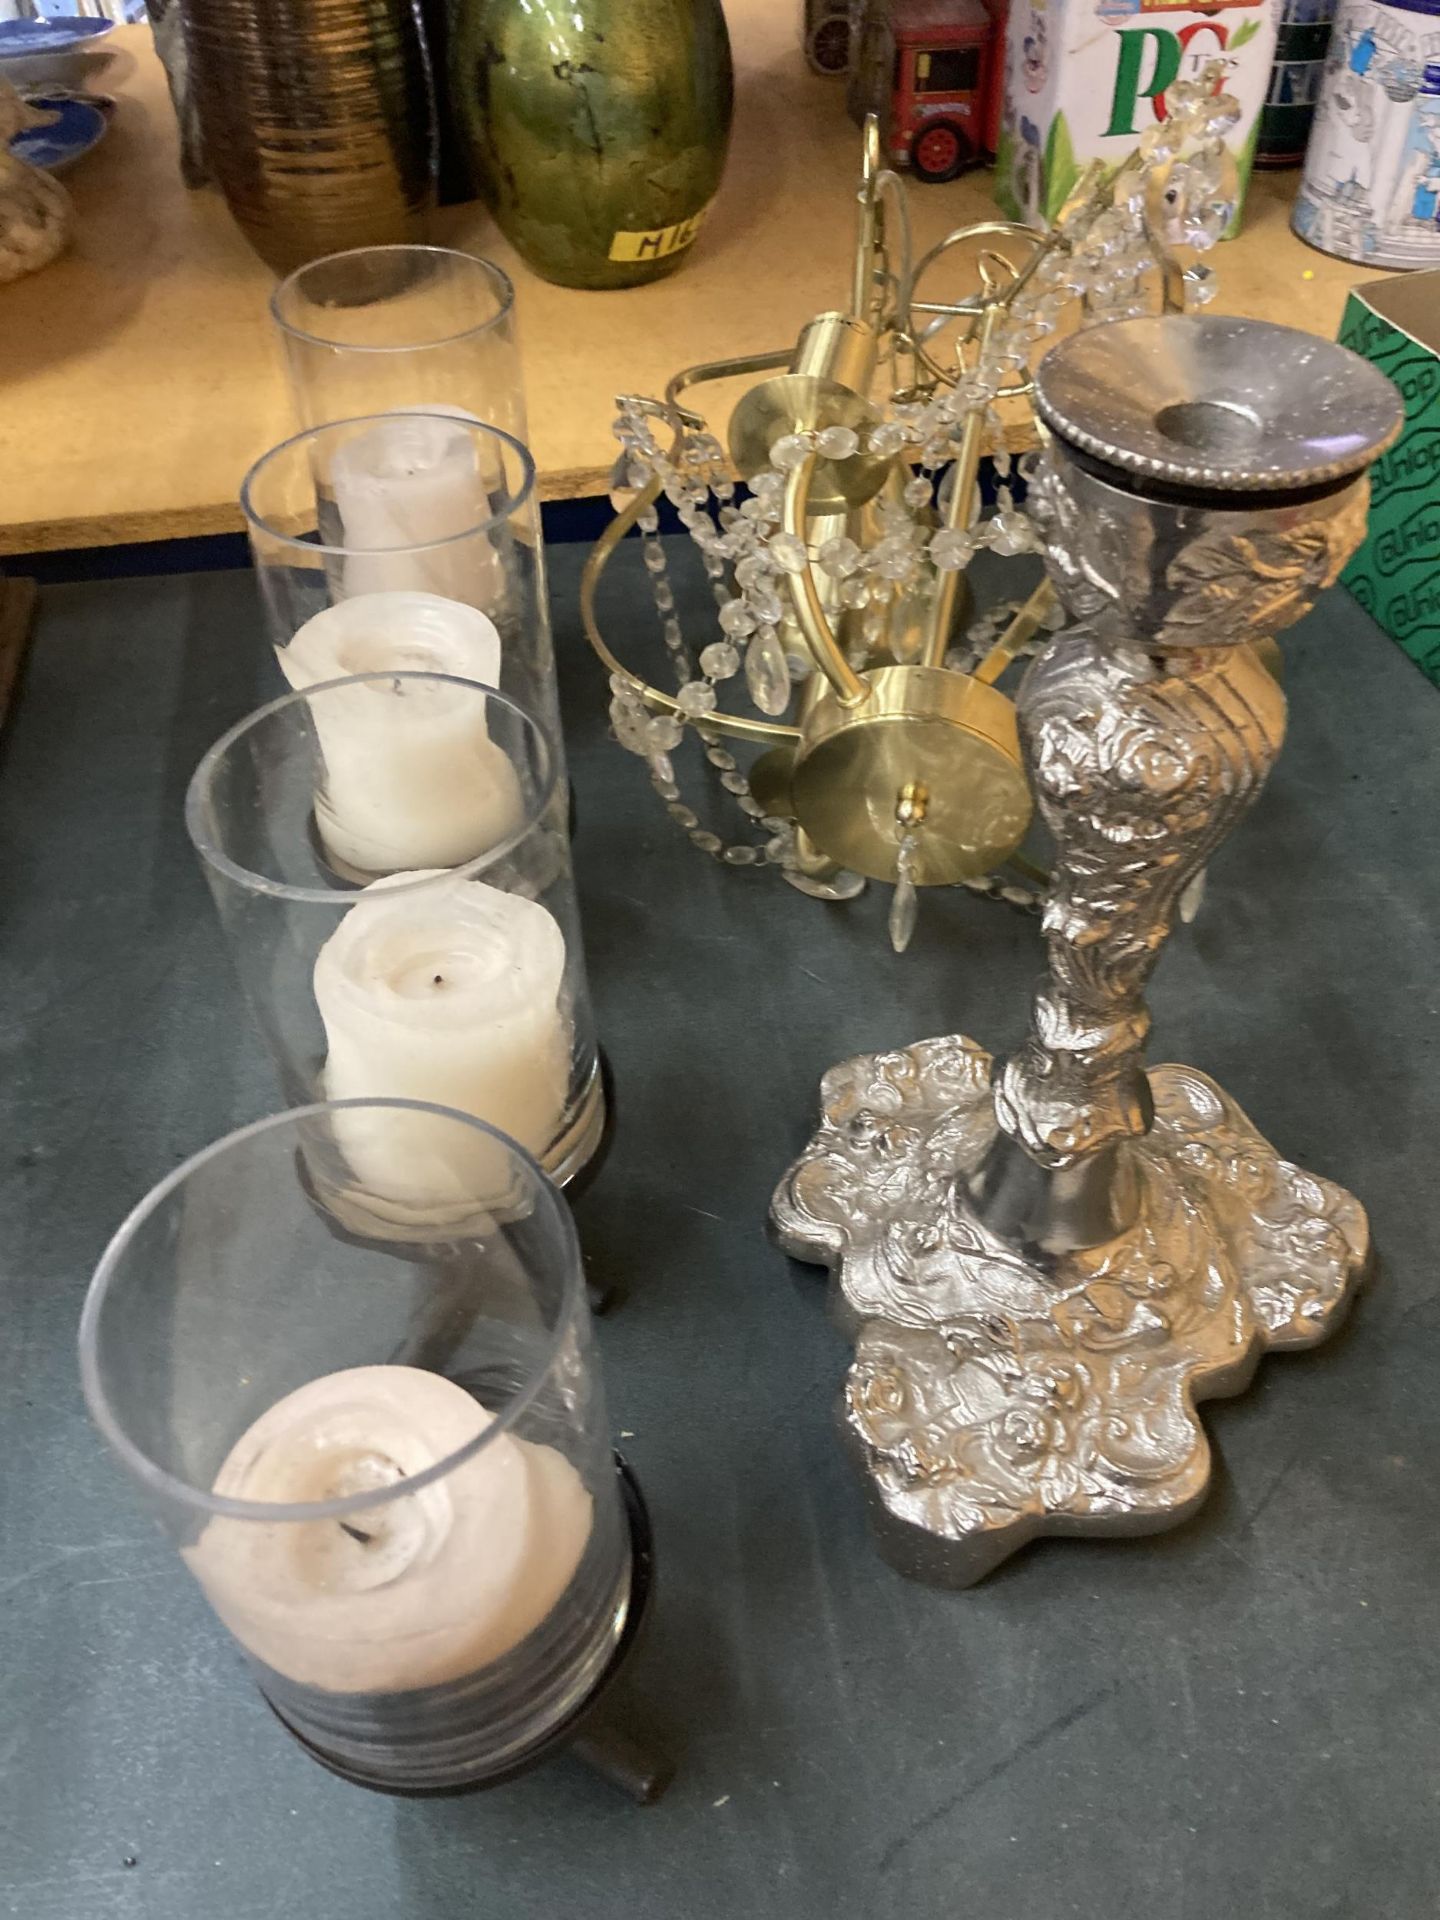 A LARGE METAL CANDLE HOLDER HOLDING FOUR LARGE CANDLES IN GLASS HOLDERS, A LARGE SILVER COLOURED - Image 2 of 5